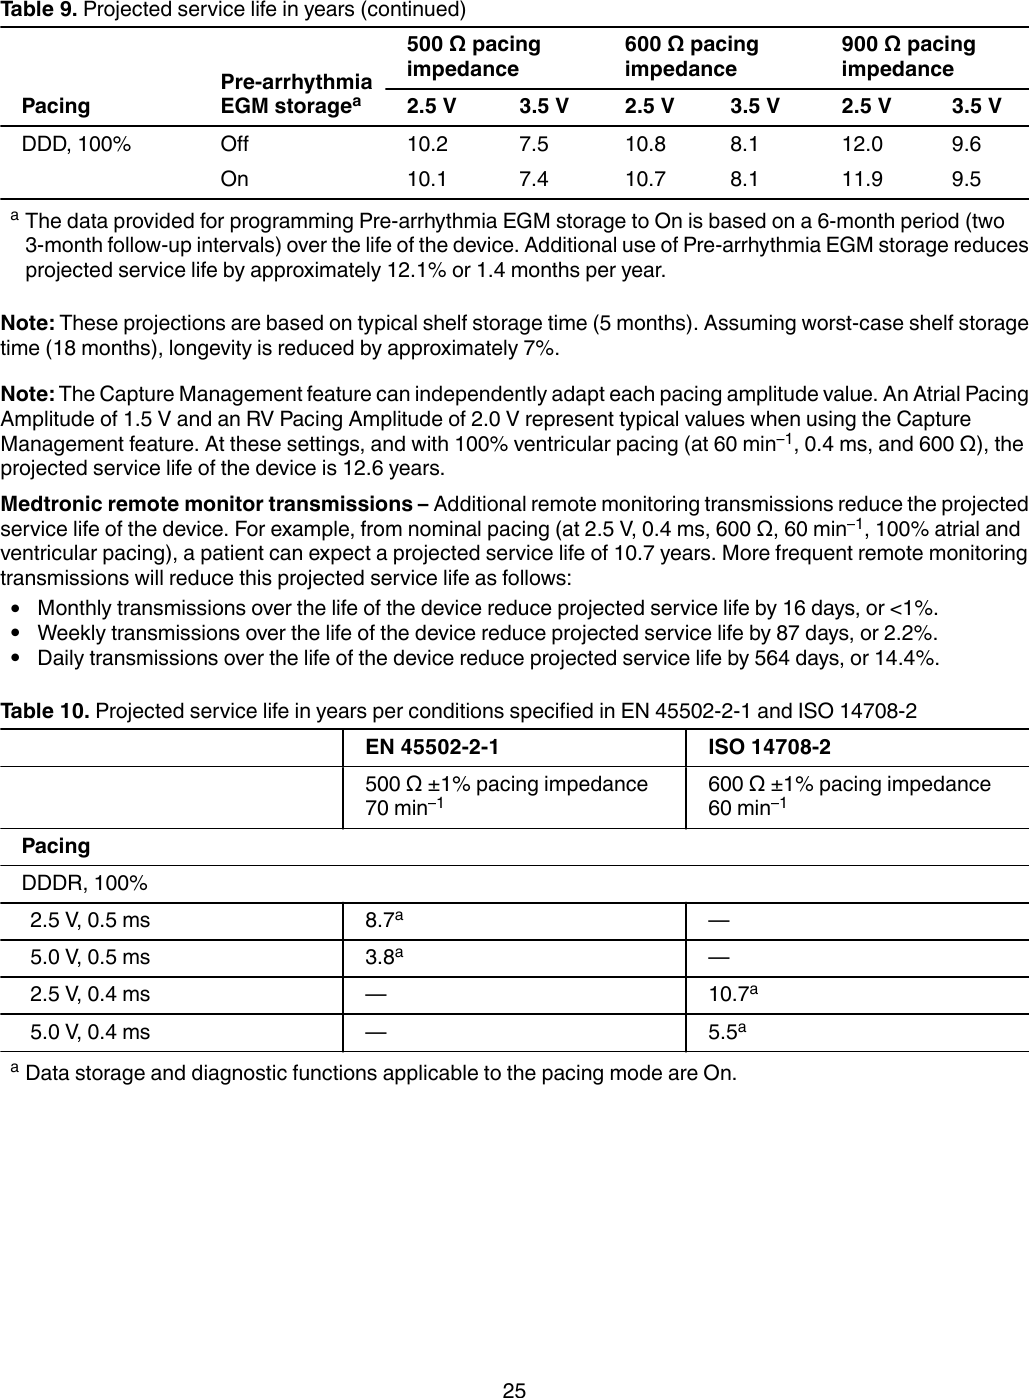 Table 9. Projected service life in years (continued)PacingPre-arrhythmiaEGM storagea500 Ω pacingimpedance600 Ω pacingimpedance900 Ω pacingimpedance2.5 V 3.5 V 2.5 V 3.5 V 2.5 V 3.5 VDDD, 100% Off 10.2 7.5 10.8 8.1 12.0 9.6On 10.1 7.4 10.7 8.1 11.9 9.5aThe data provided for programming Pre-arrhythmia EGM storage to On is based on a 6-month period (two3-month follow-up intervals) over the life of the device. Additional use of Pre-arrhythmia EGM storage reducesprojected service life by approximately 12.1% or 1.4 months per year.Note: These projections are based on typical shelf storage time (5 months). Assuming worst-case shelf storagetime (18 months), longevity is reduced by approximately 7%.Note: The Capture Management feature can independently adapt each pacing amplitude value. An Atrial PacingAmplitude of 1.5 V and an RV Pacing Amplitude of 2.0 V represent typical values when using the CaptureManagement feature. At these settings, and with 100% ventricular pacing (at 60 min–1, 0.4 ms, and 600 Ω), theprojected service life of the device is 12.6 years.Medtronic remote monitor transmissions – Additional remote monitoring transmissions reduce the projectedservice life of the device. For example, from nominal pacing (at 2.5 V, 0.4 ms, 600 Ω, 60 min–1, 100% atrial andventricular pacing), a patient can expect a projected service life of 10.7 years. More frequent remote monitoringtransmissions will reduce this projected service life as follows:●Monthly transmissions over the life of the device reduce projected service life by 16 days, or &lt;1%.●Weekly transmissions over the life of the device reduce projected service life by 87 days, or 2.2%.●Daily transmissions over the life of the device reduce projected service life by 564 days, or 14.4%.Table 10. Projected service life in years per conditions specified in EN 45502-2-1 and ISO 14708-2EN 45502-2-1 ISO 14708-2500 Ω ±1% pacing impedance70 min–1600 Ω ±1% pacing impedance60 min–1PacingDDDR, 100%2.5 V, 0.5 ms 8.7a—5.0 V, 0.5 ms 3.8a—2.5 V, 0.4 ms — 10.7a5.0 V, 0.4 ms — 5.5aaData storage and diagnostic functions applicable to the pacing mode are On.25